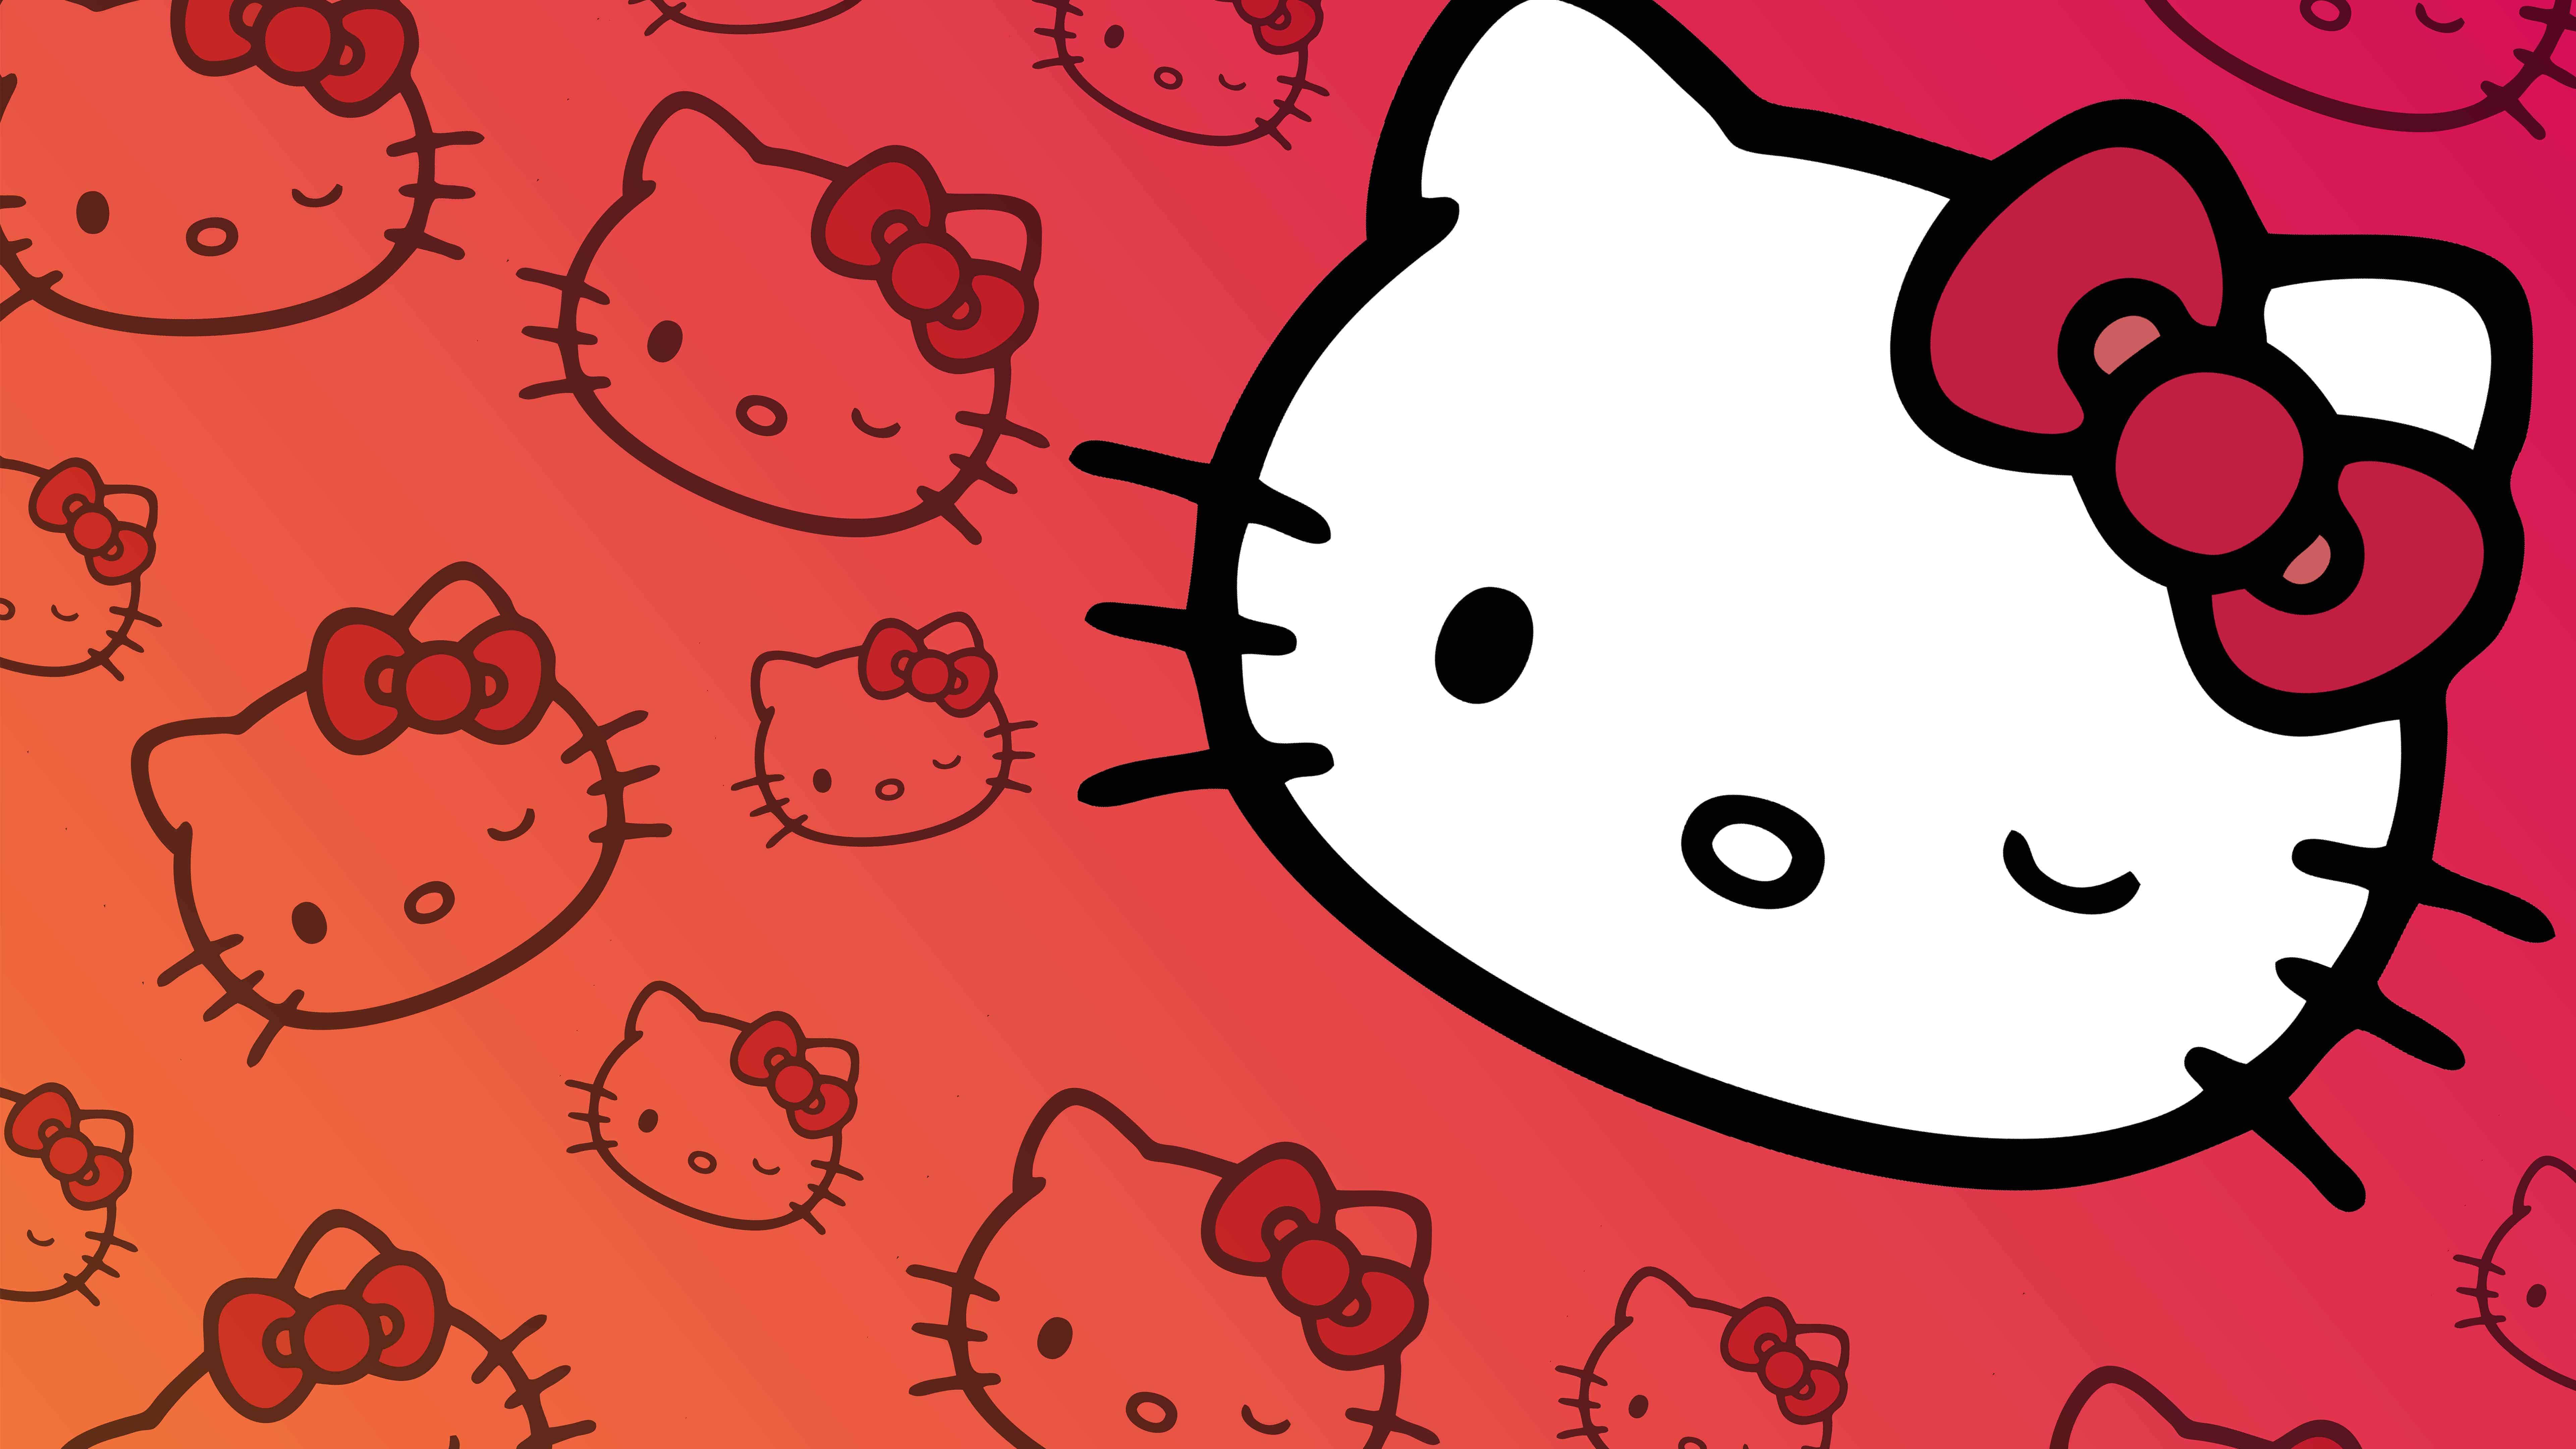 Cute kitty live wallpaper Apk Download for Android Latest version 233  kittylivewallpaper